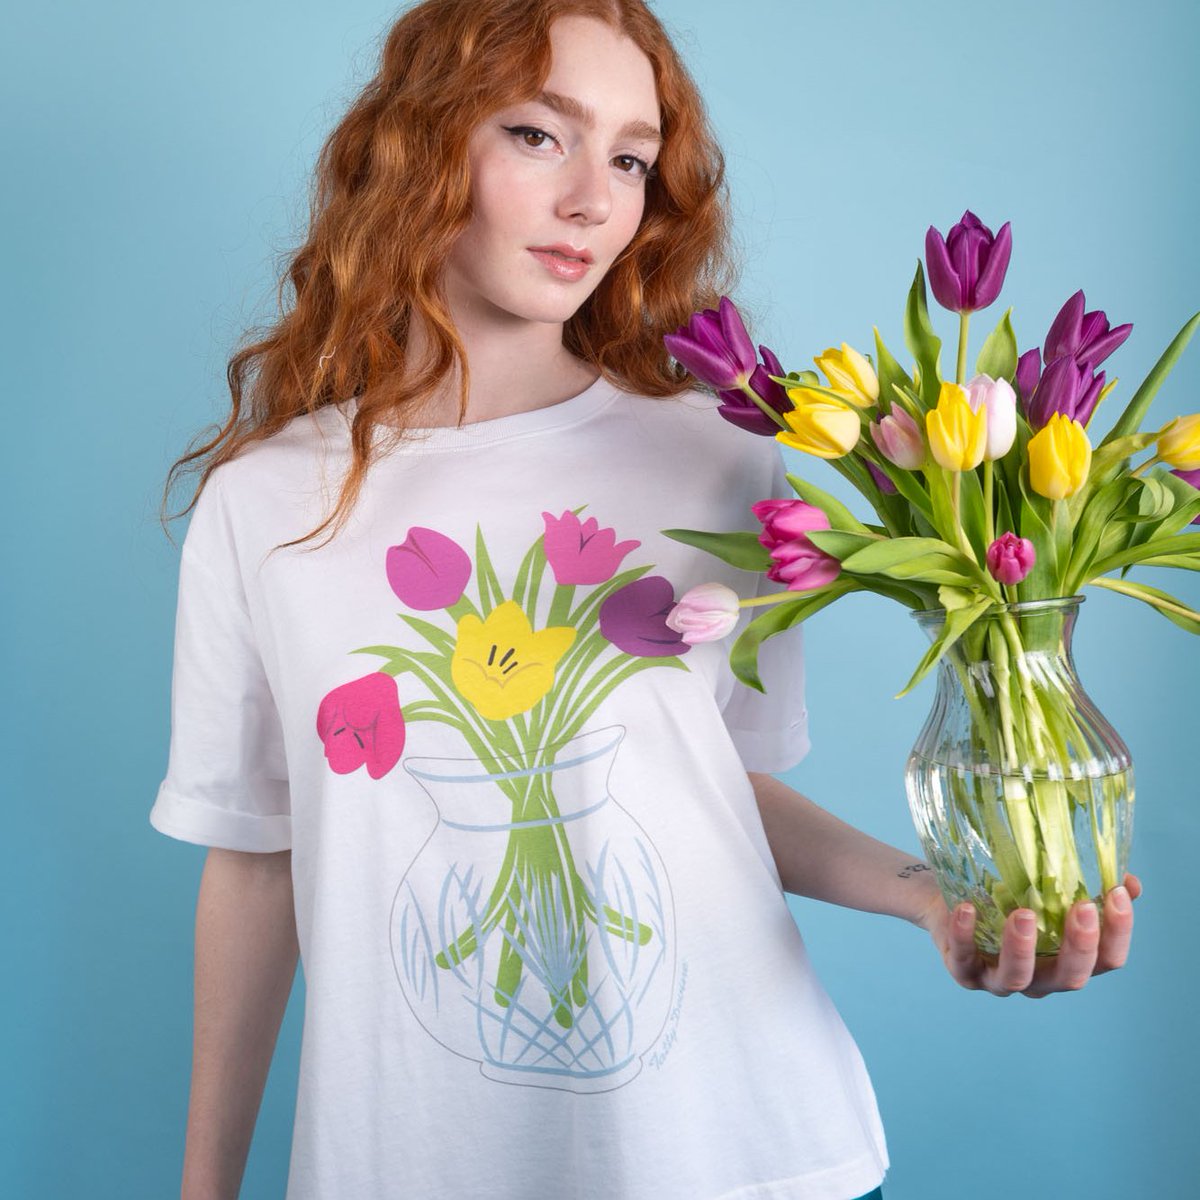 Sustainable clothing you'll dig? 👨‍🌾 Shop fresh designs with FREE UK SHIPPING on tattydevinetees.com all weekend, including our new #PopFolk-inspired designs 🌷